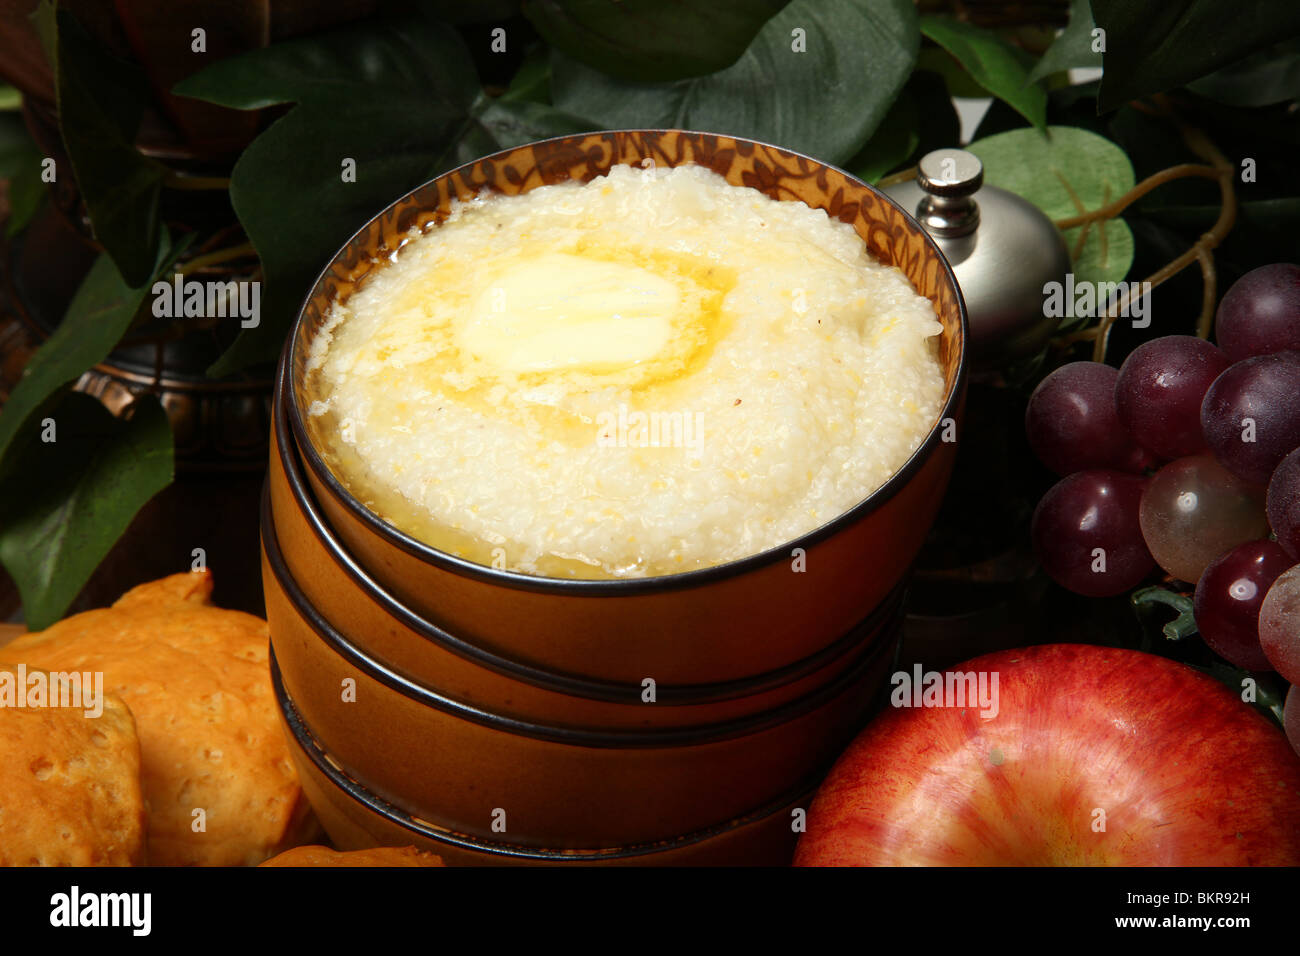 Bowl of hot grits and butter with biscuits and fruit in kitchen. Stock Photo